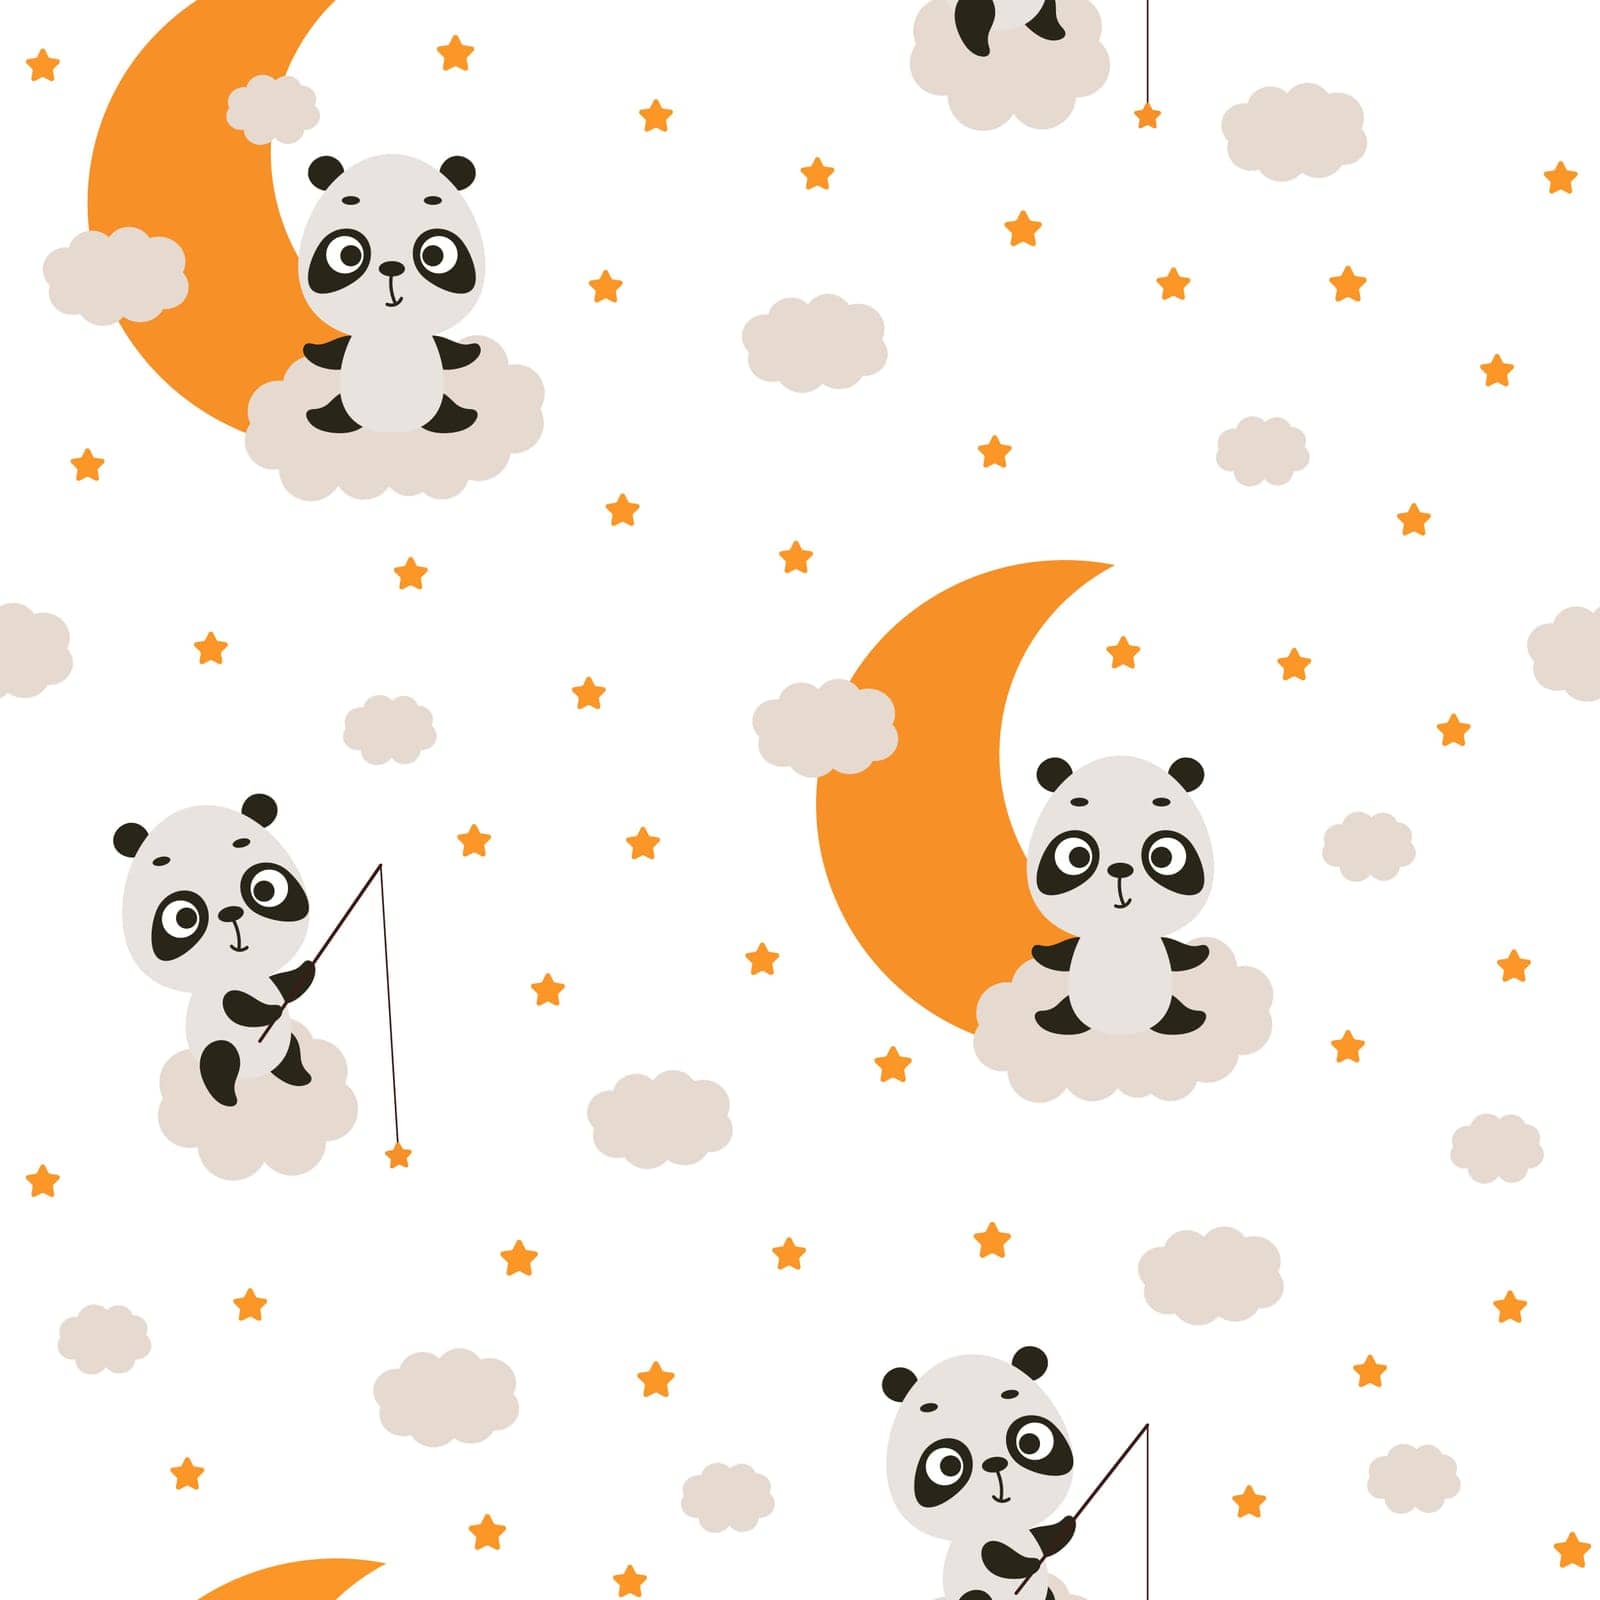 Cute little panda sitting on cloud and fishing star seamless childish pattern. Funny cartoon animal character for fabric, wrapping, textile, wallpaper, apparel. Vector illustration